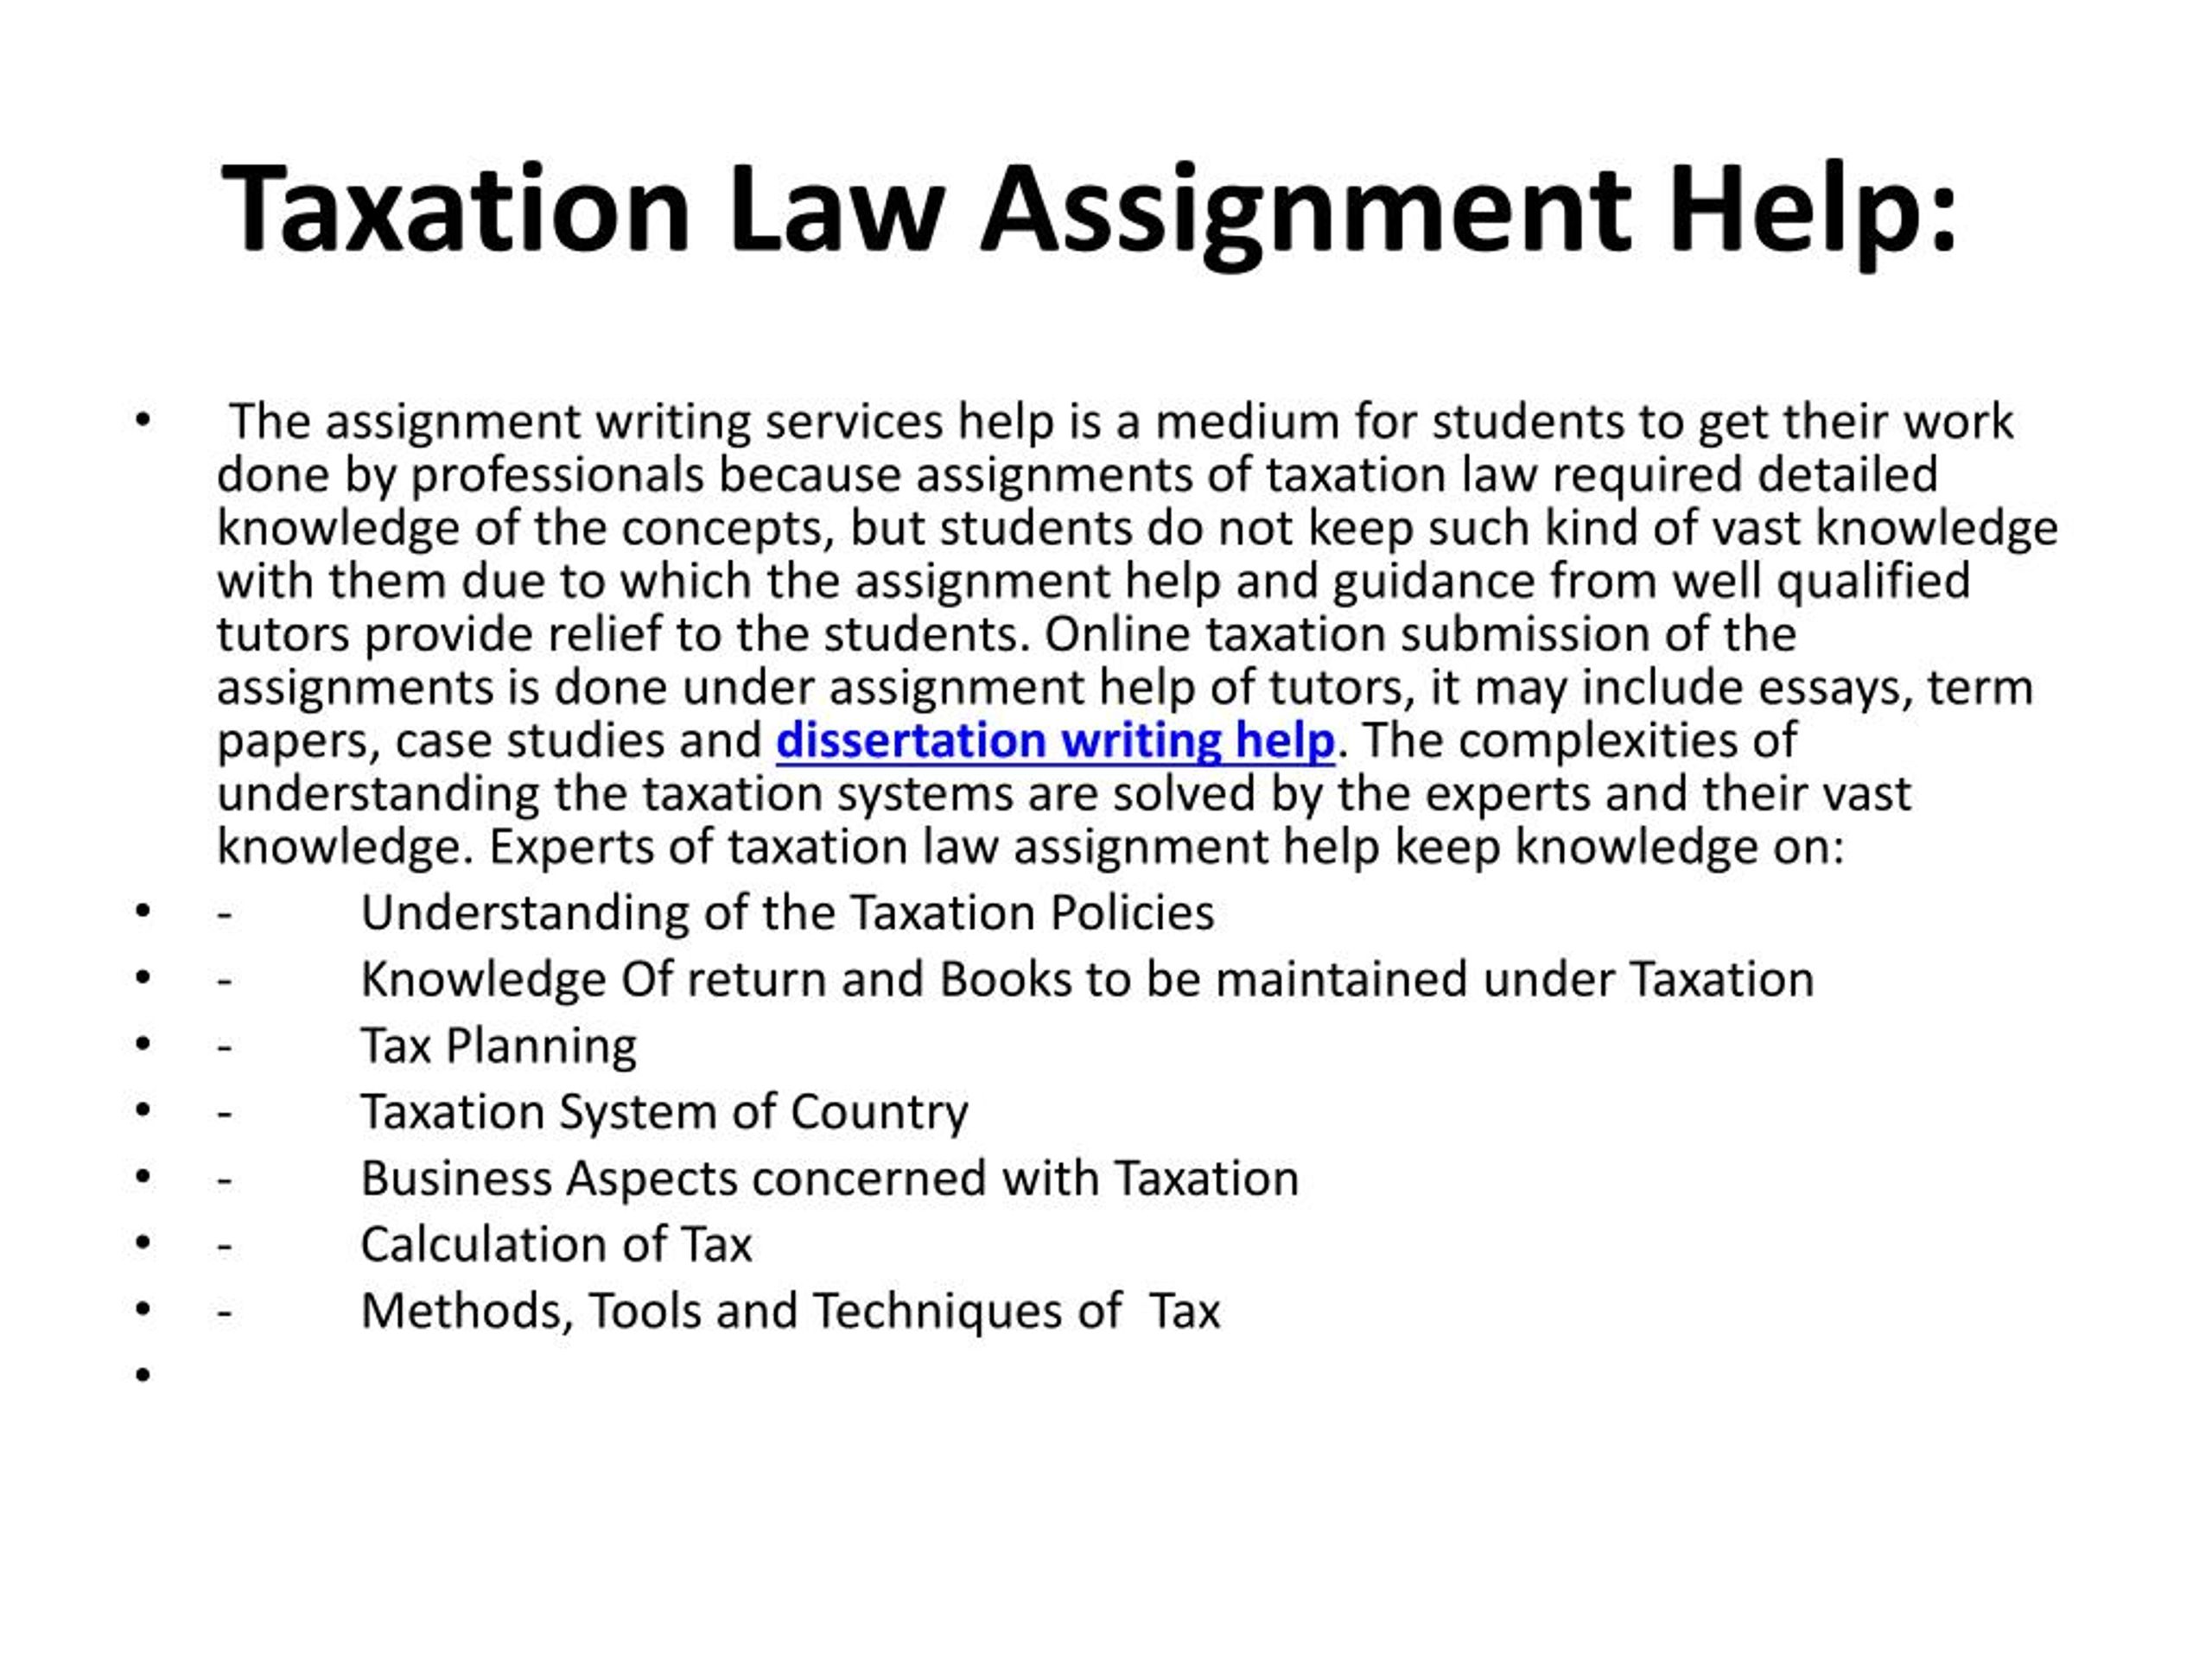 phd in taxation and business law